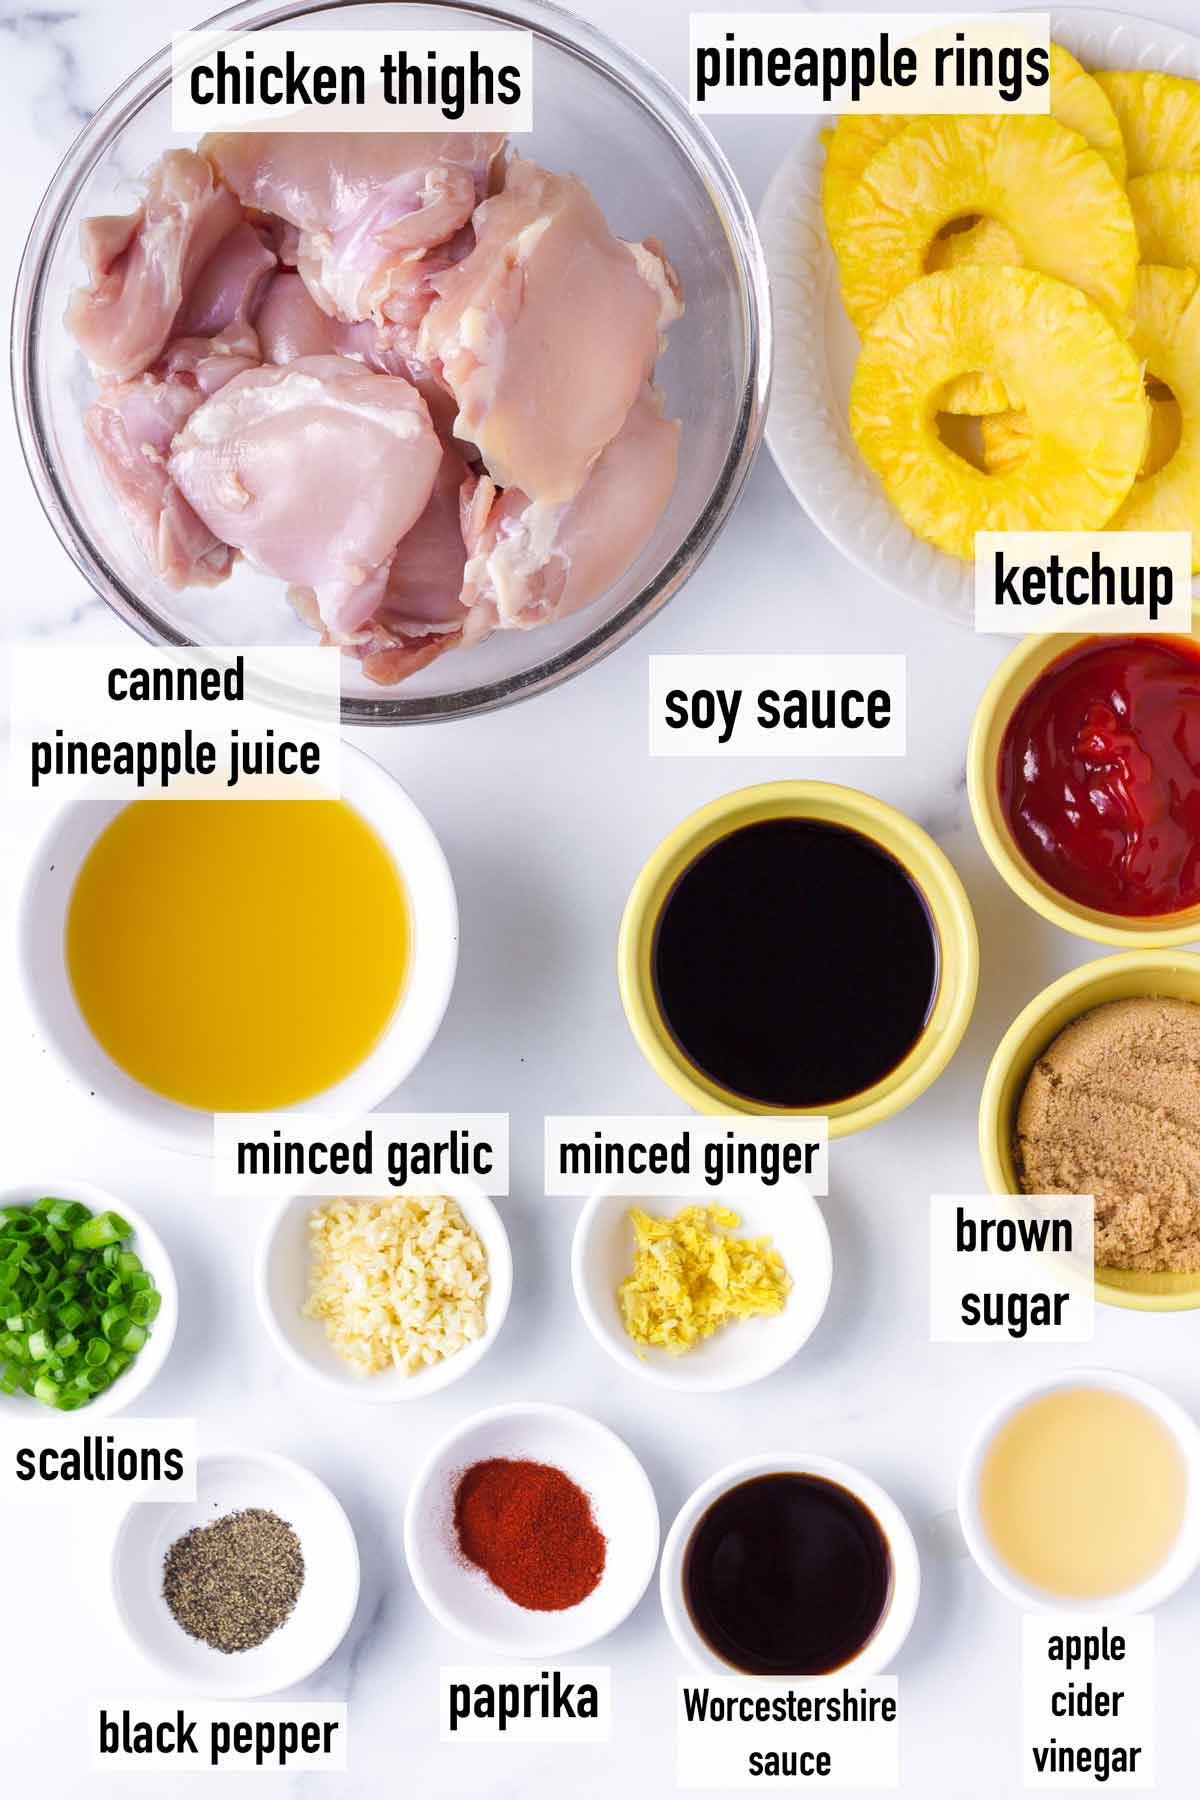 labeled ingredients on table